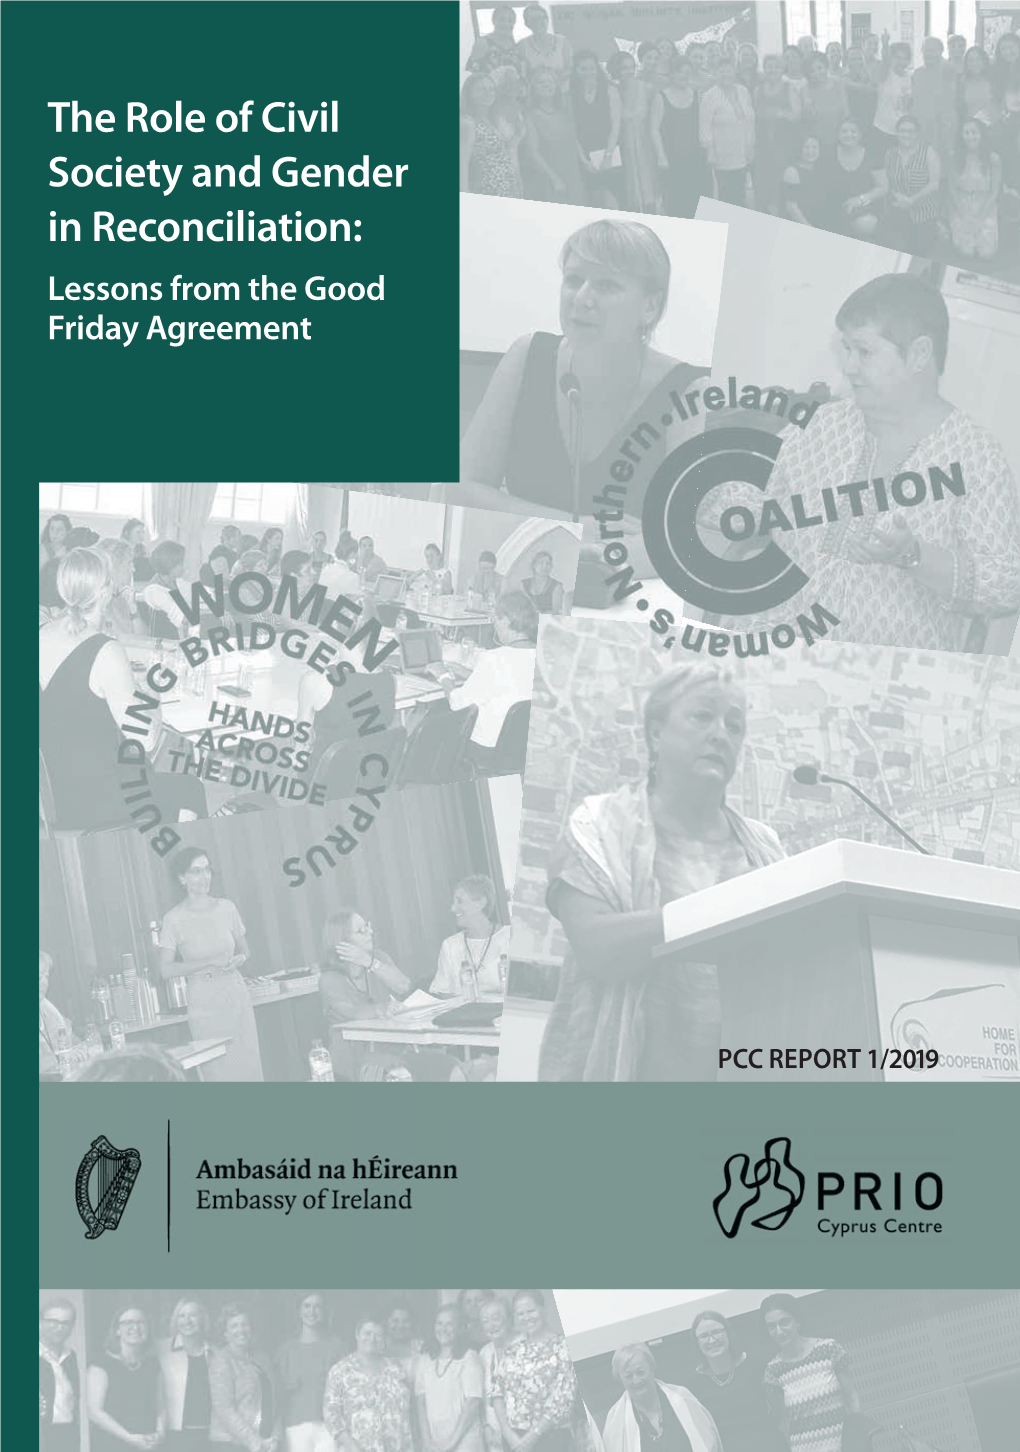 The Role of Civil Society and Gender in Reconciliation: Lessons from the Good Friday Agreement